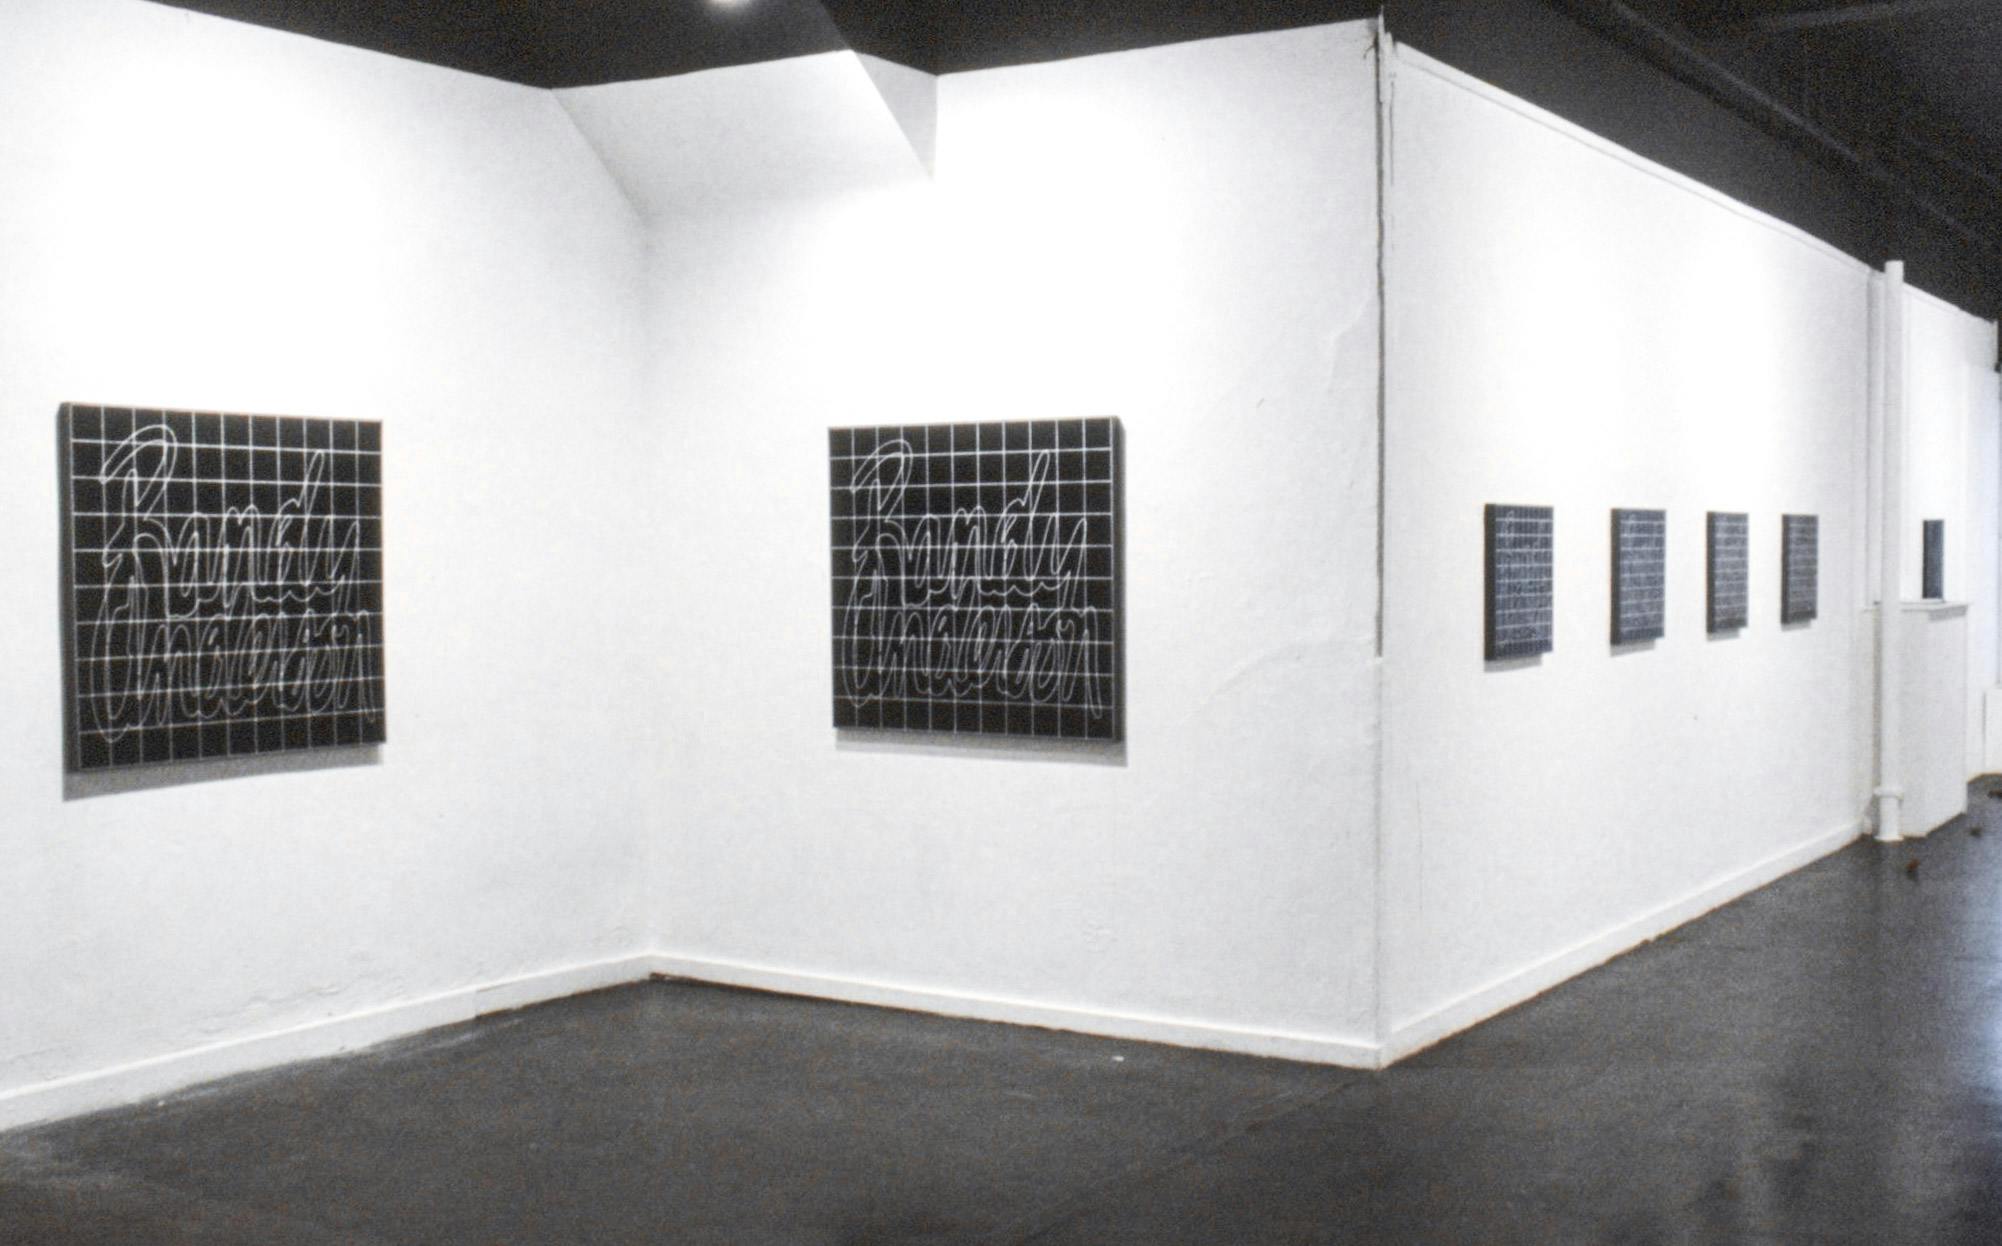 Rows of nearly identical paintings across the walls of a gallery. They are black with white outlined text reading "Randy Anderson" and a white grid on top.